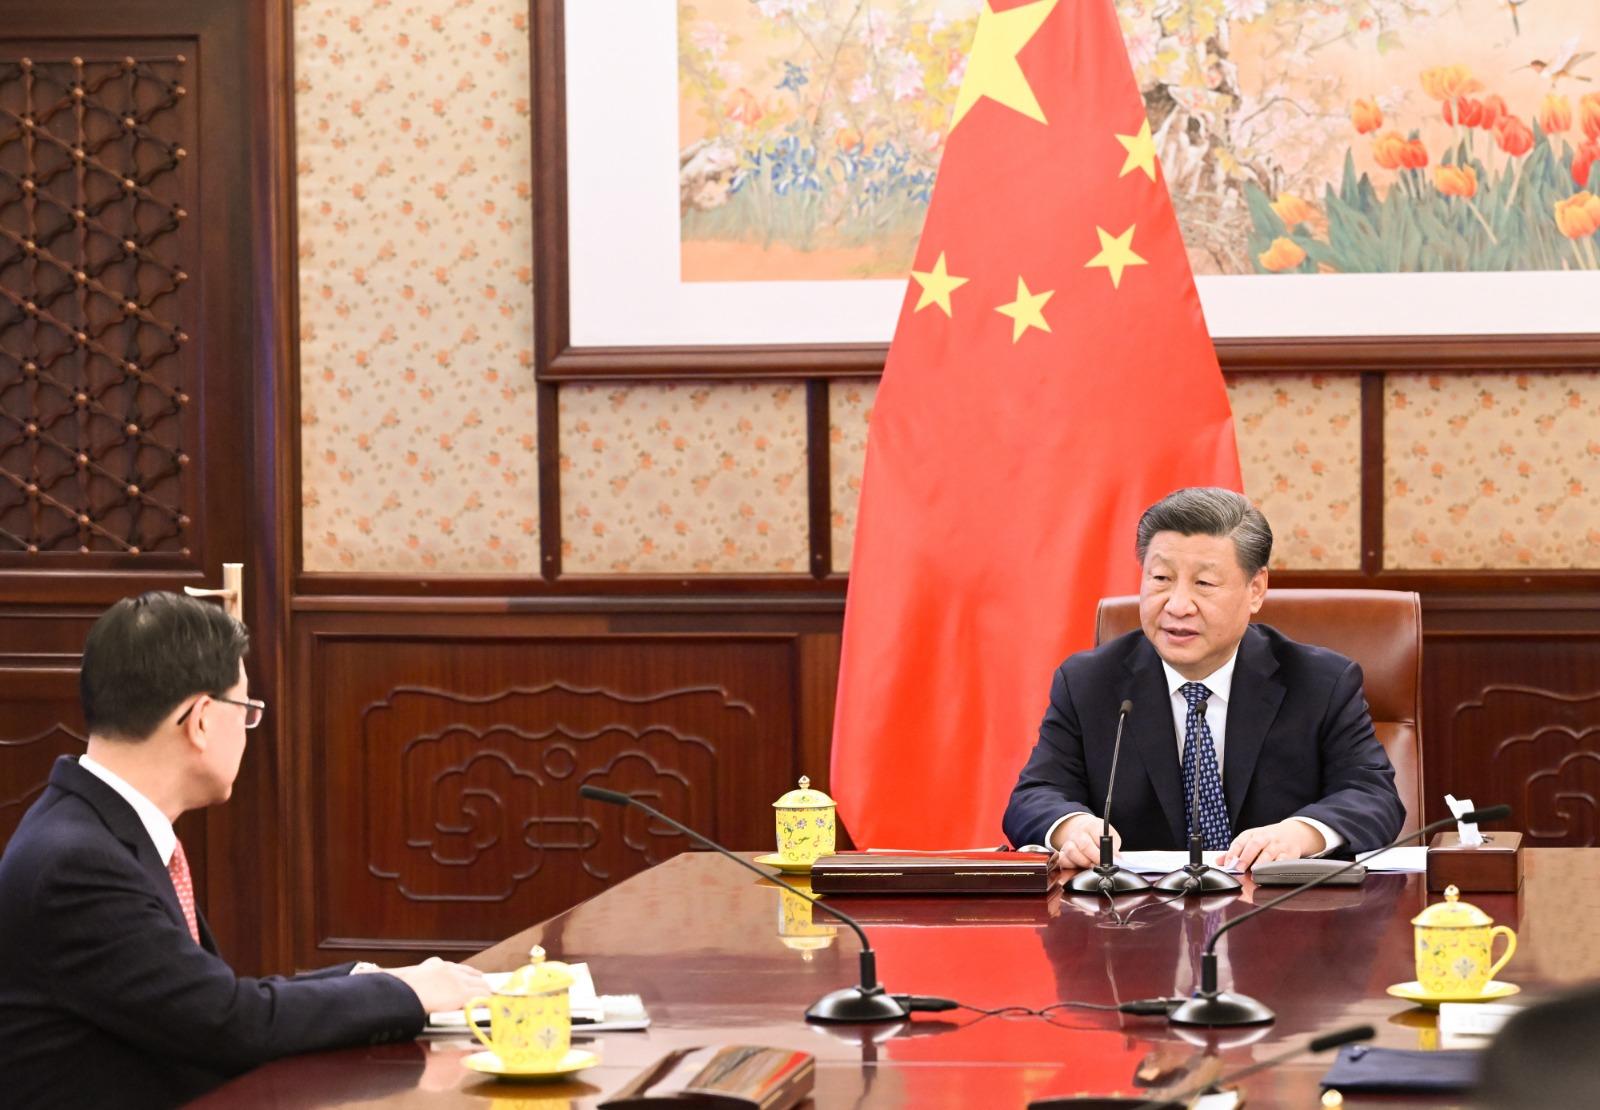 The Chief Executive, Mr John Lee (left), briefs President Xi Jinping in Beijing today (December 23) on the latest economic, social and political situation in Hong Kong.
